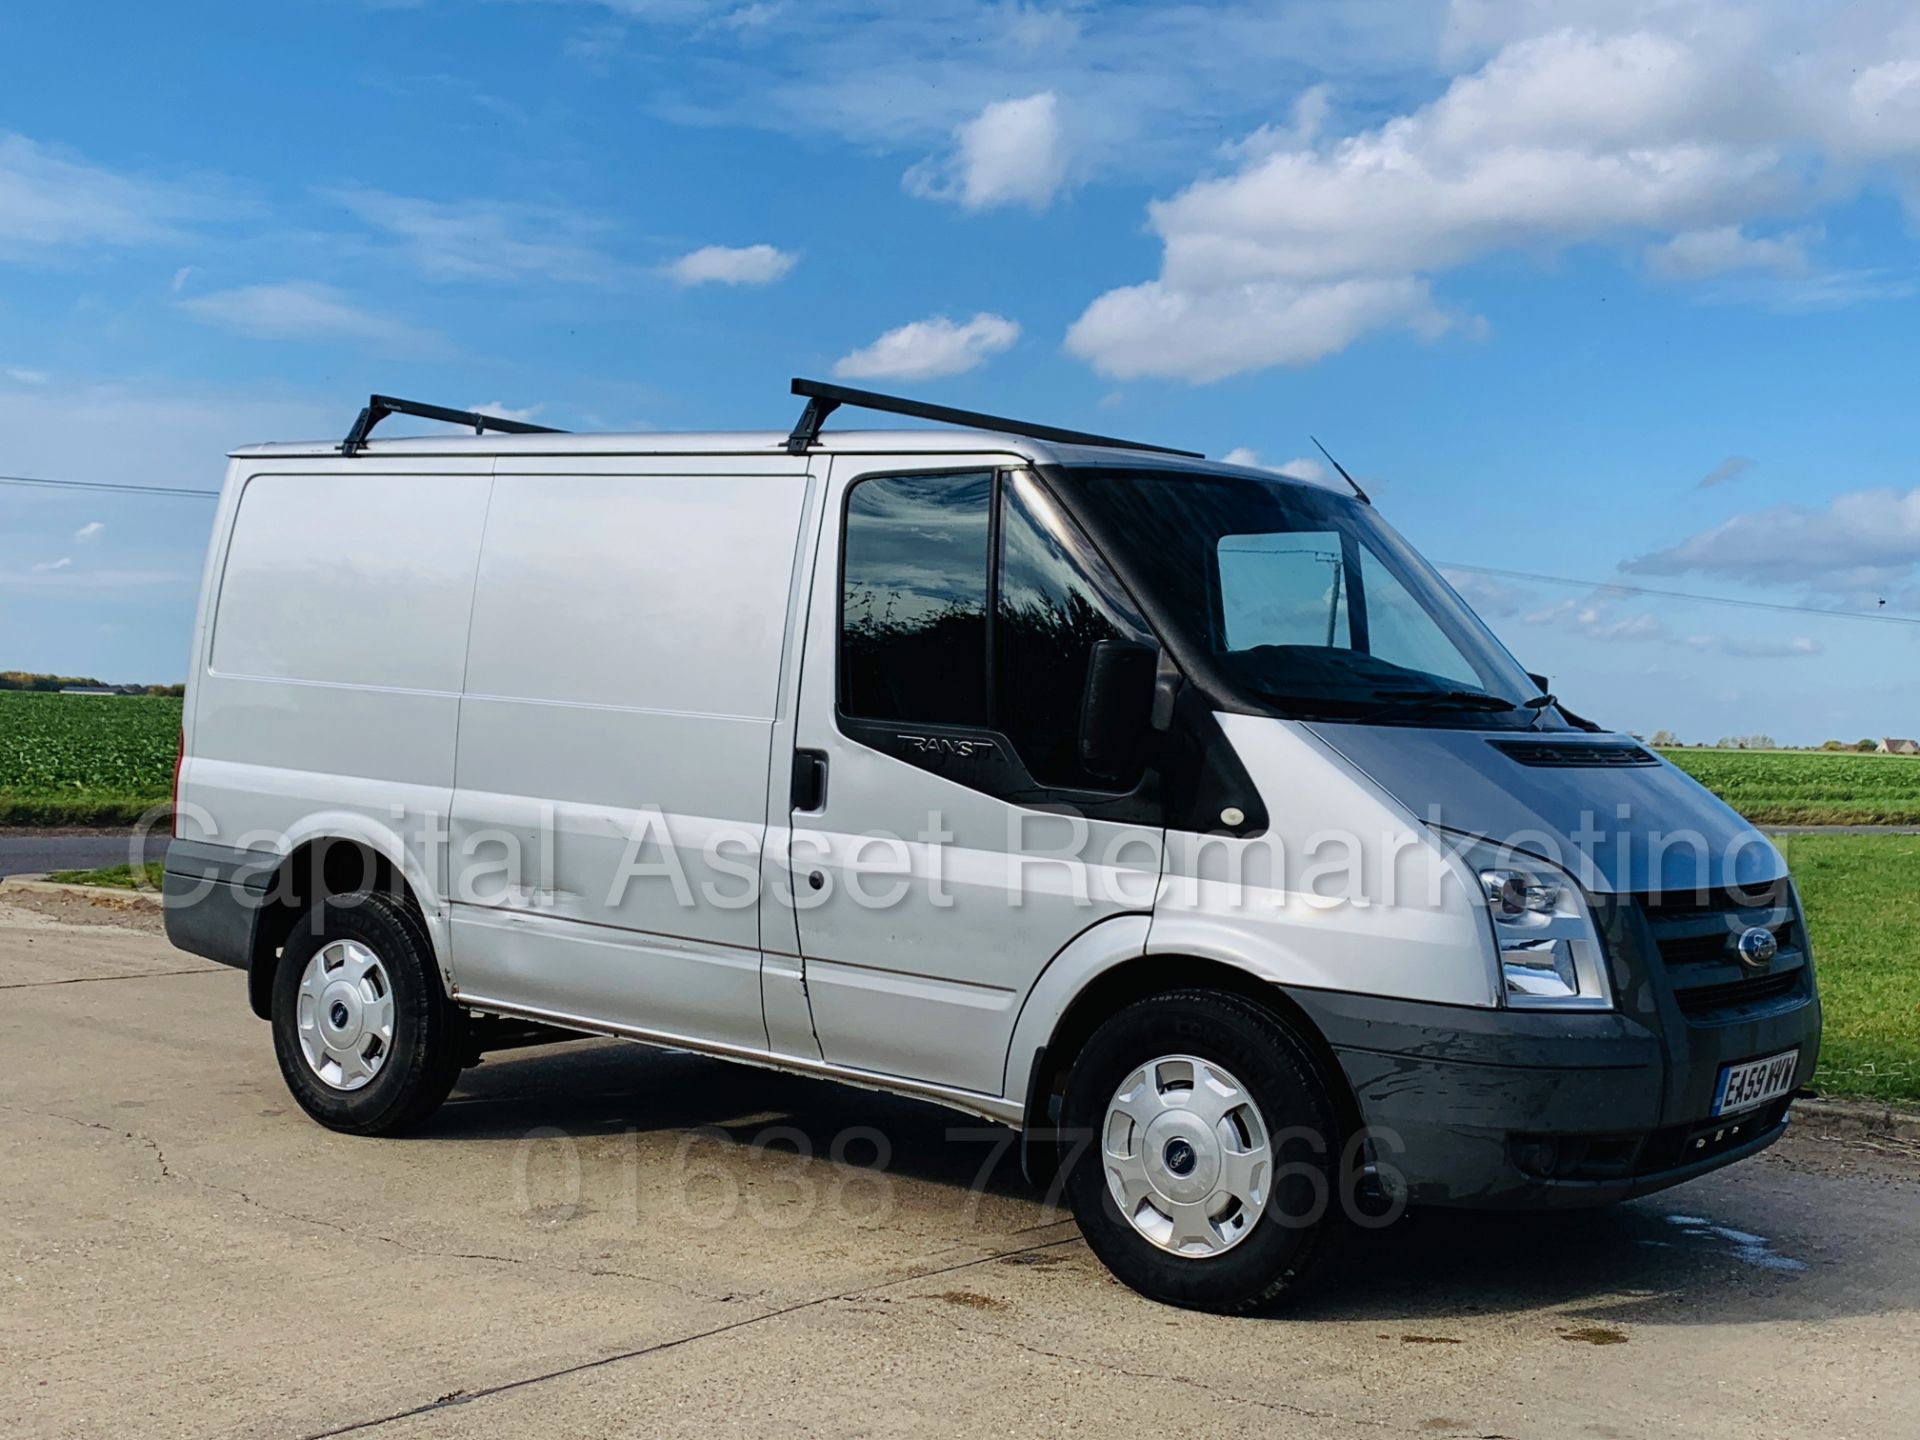 FORD TRANSIT 115 T280 SWB (2010 MODEL) '2.2 TDCI - ECO-NETIC - 115 BHP - 6 SPEED' **AIR CON** - Image 10 of 32